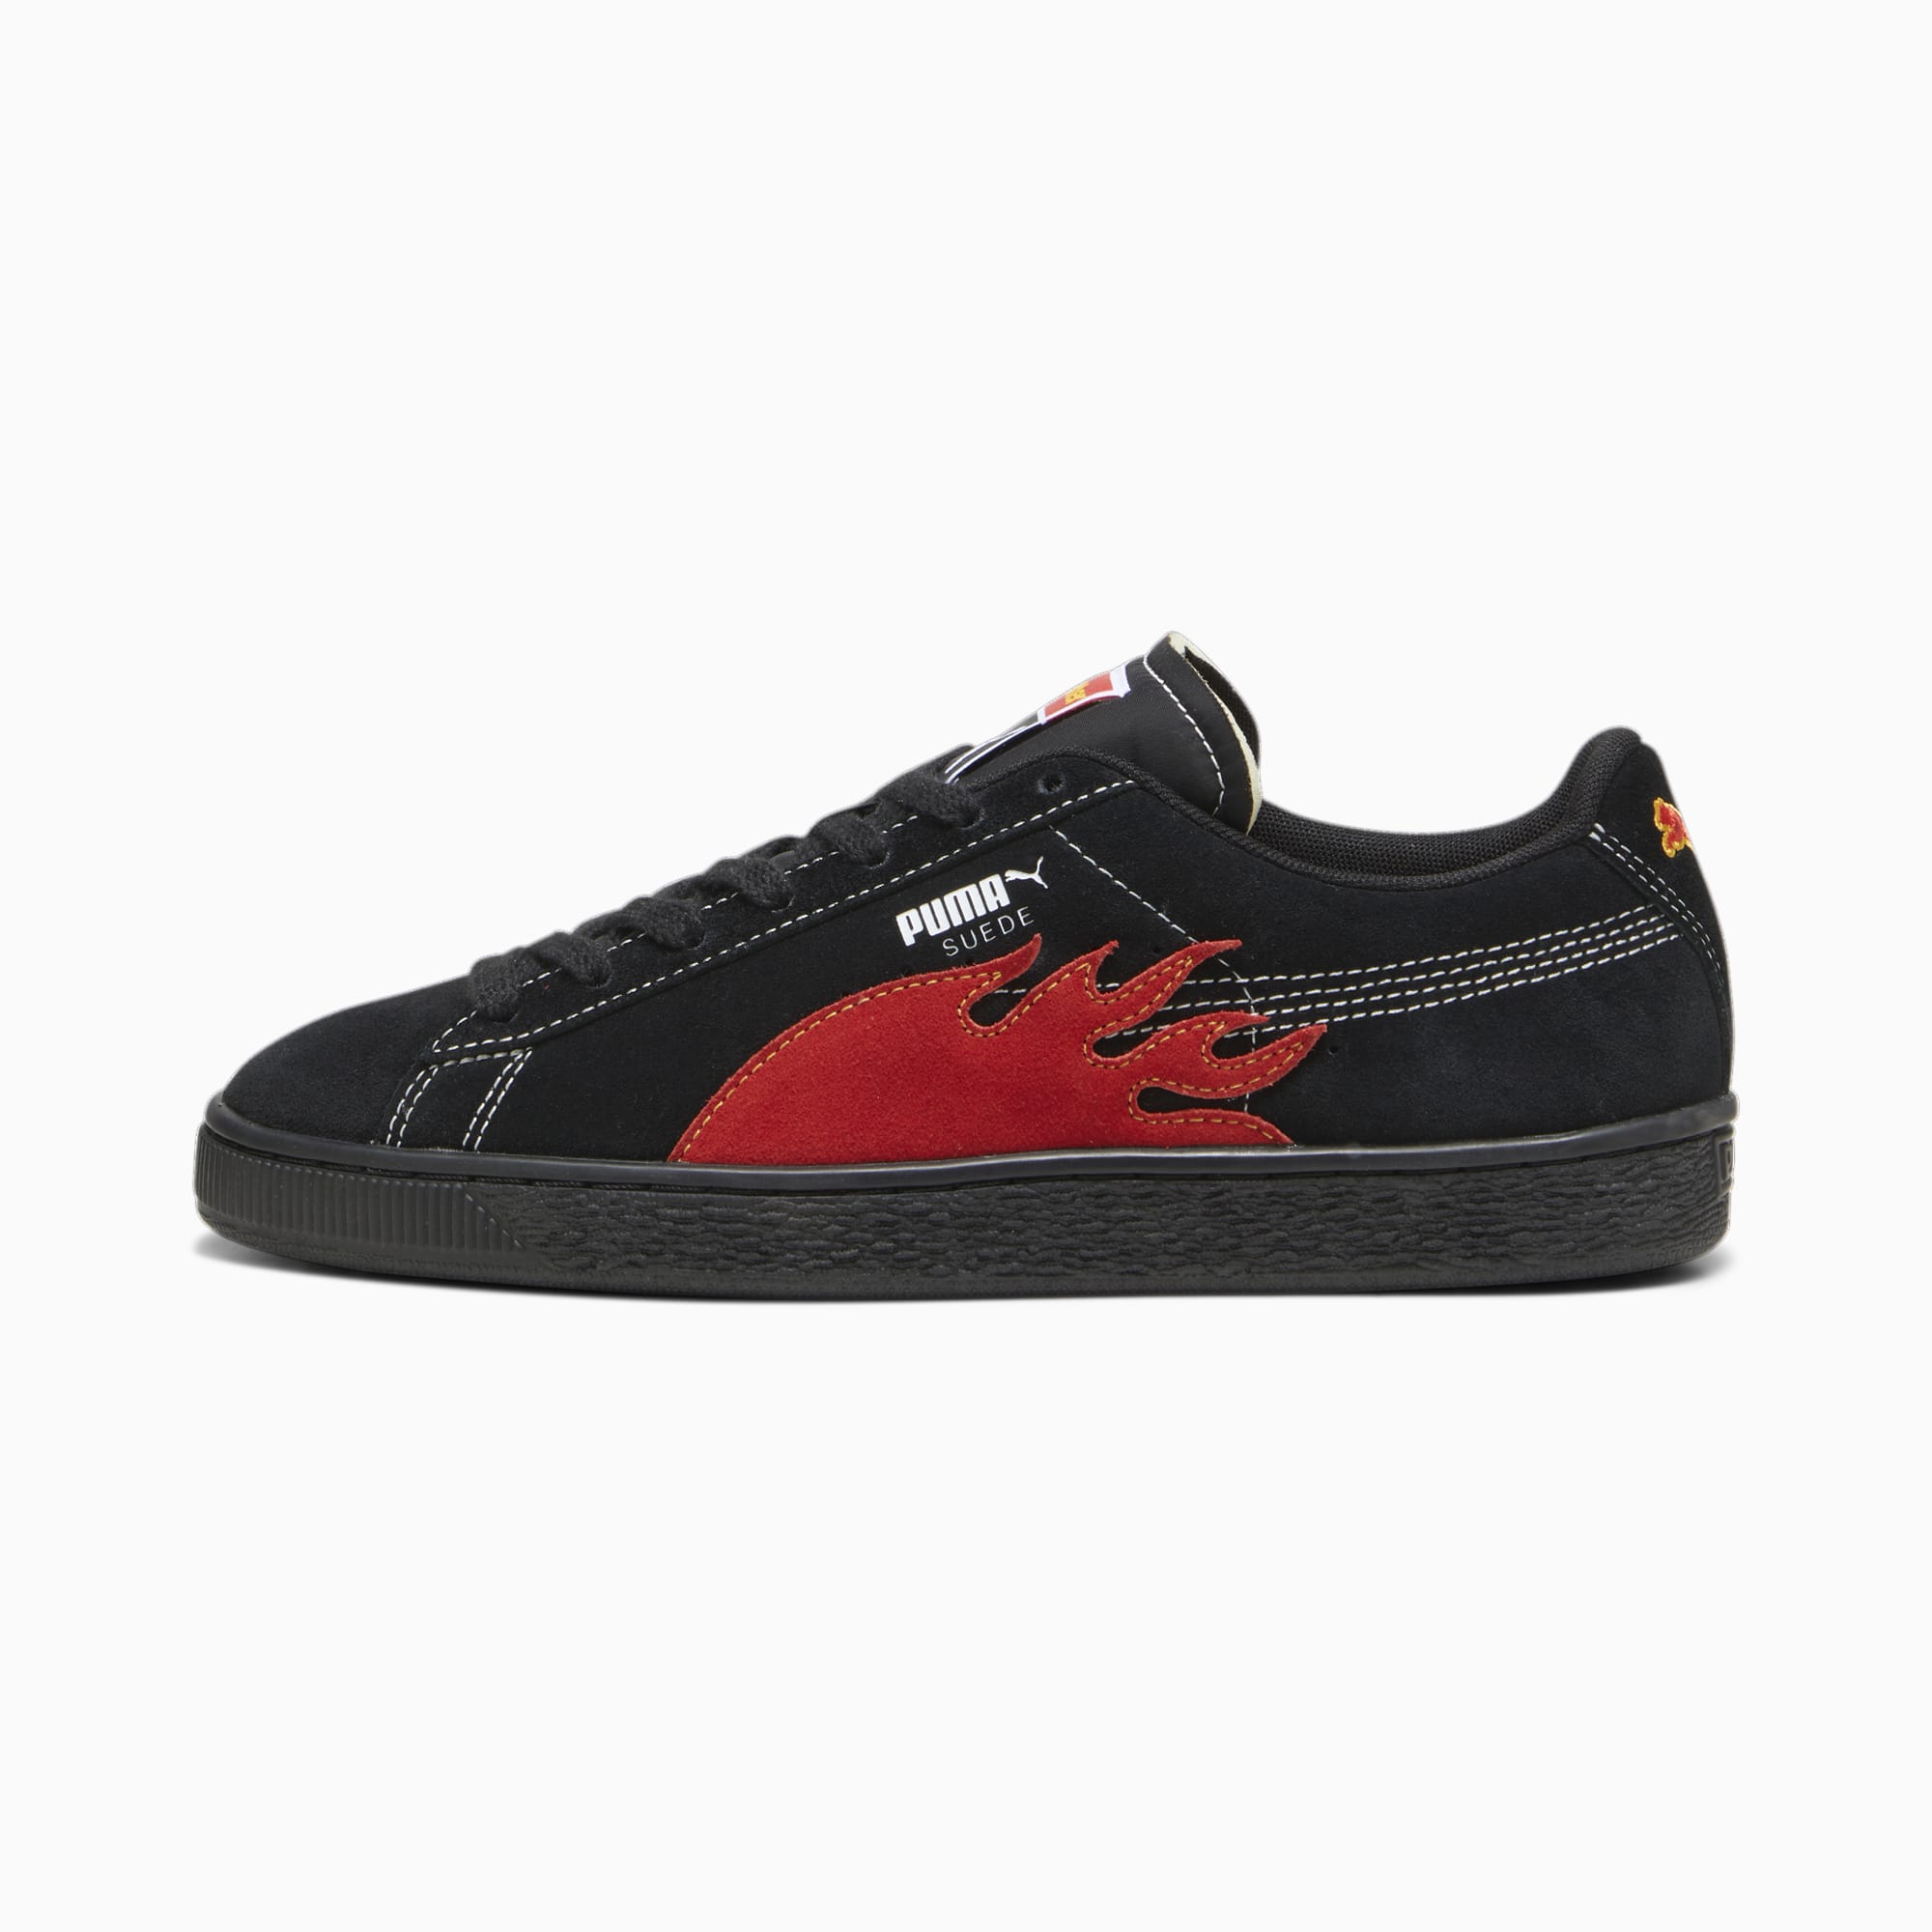 Chaussure Sneakers Suede Classic PUMA X BUTTER GOODS, Noir/Rouge